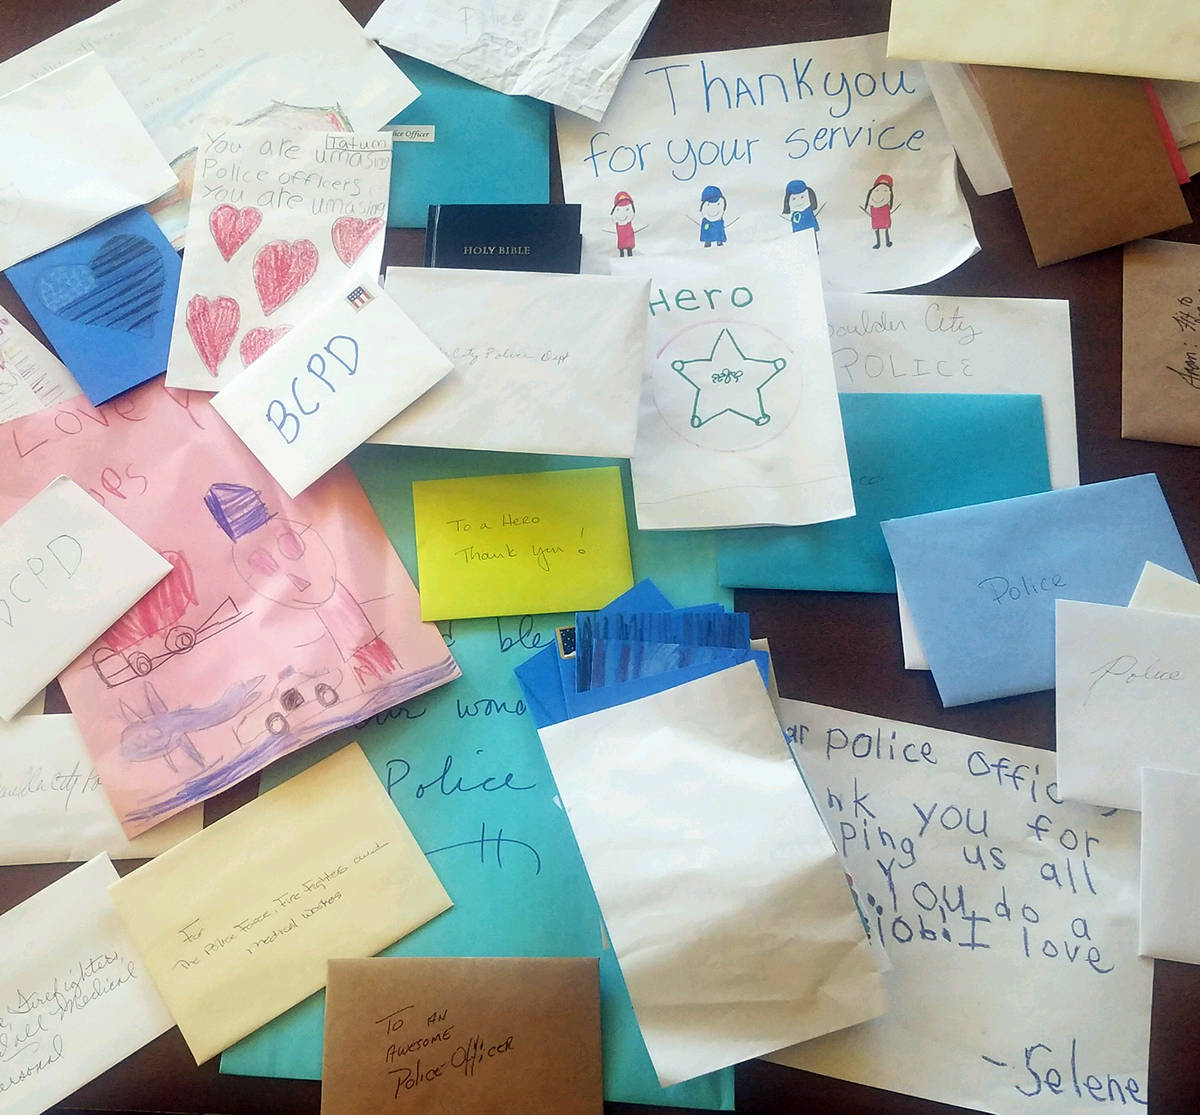 Jason King Calvary Chapel collected hundreds of thank-you cards for local first responders and ...